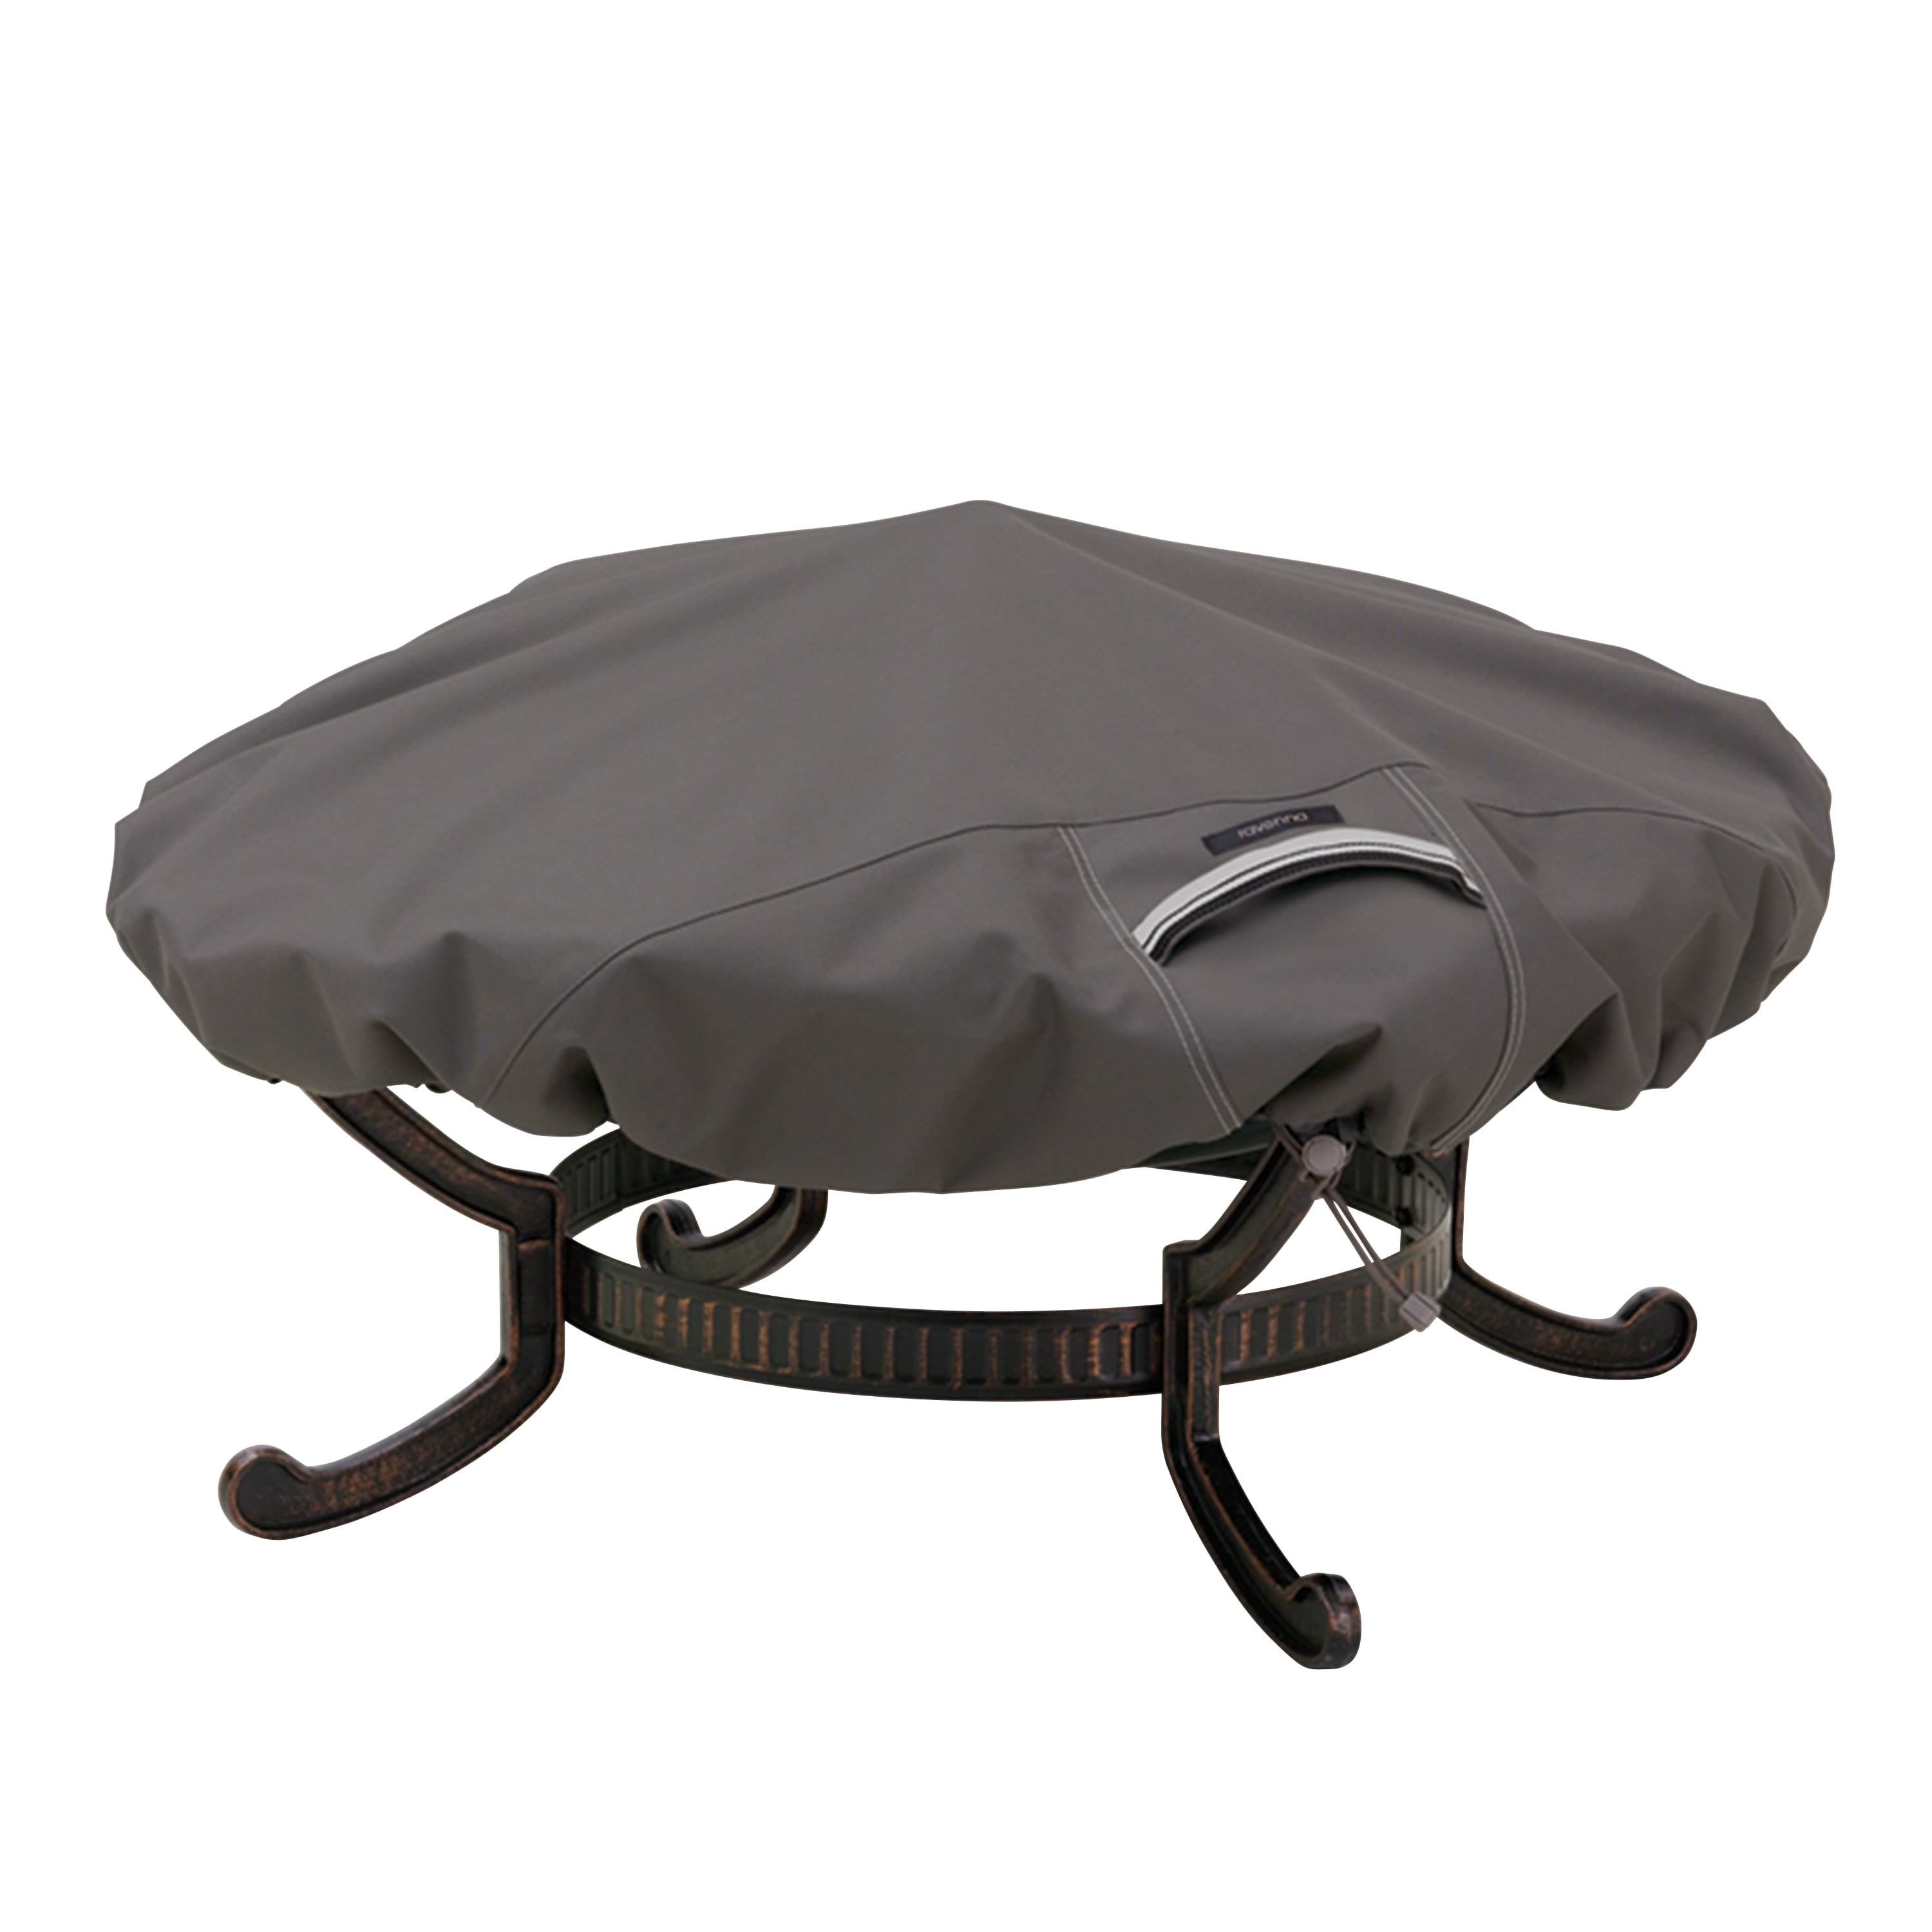 60 Inch Round Fire Pit Cover, Fire Pit 60 Inch Diameter